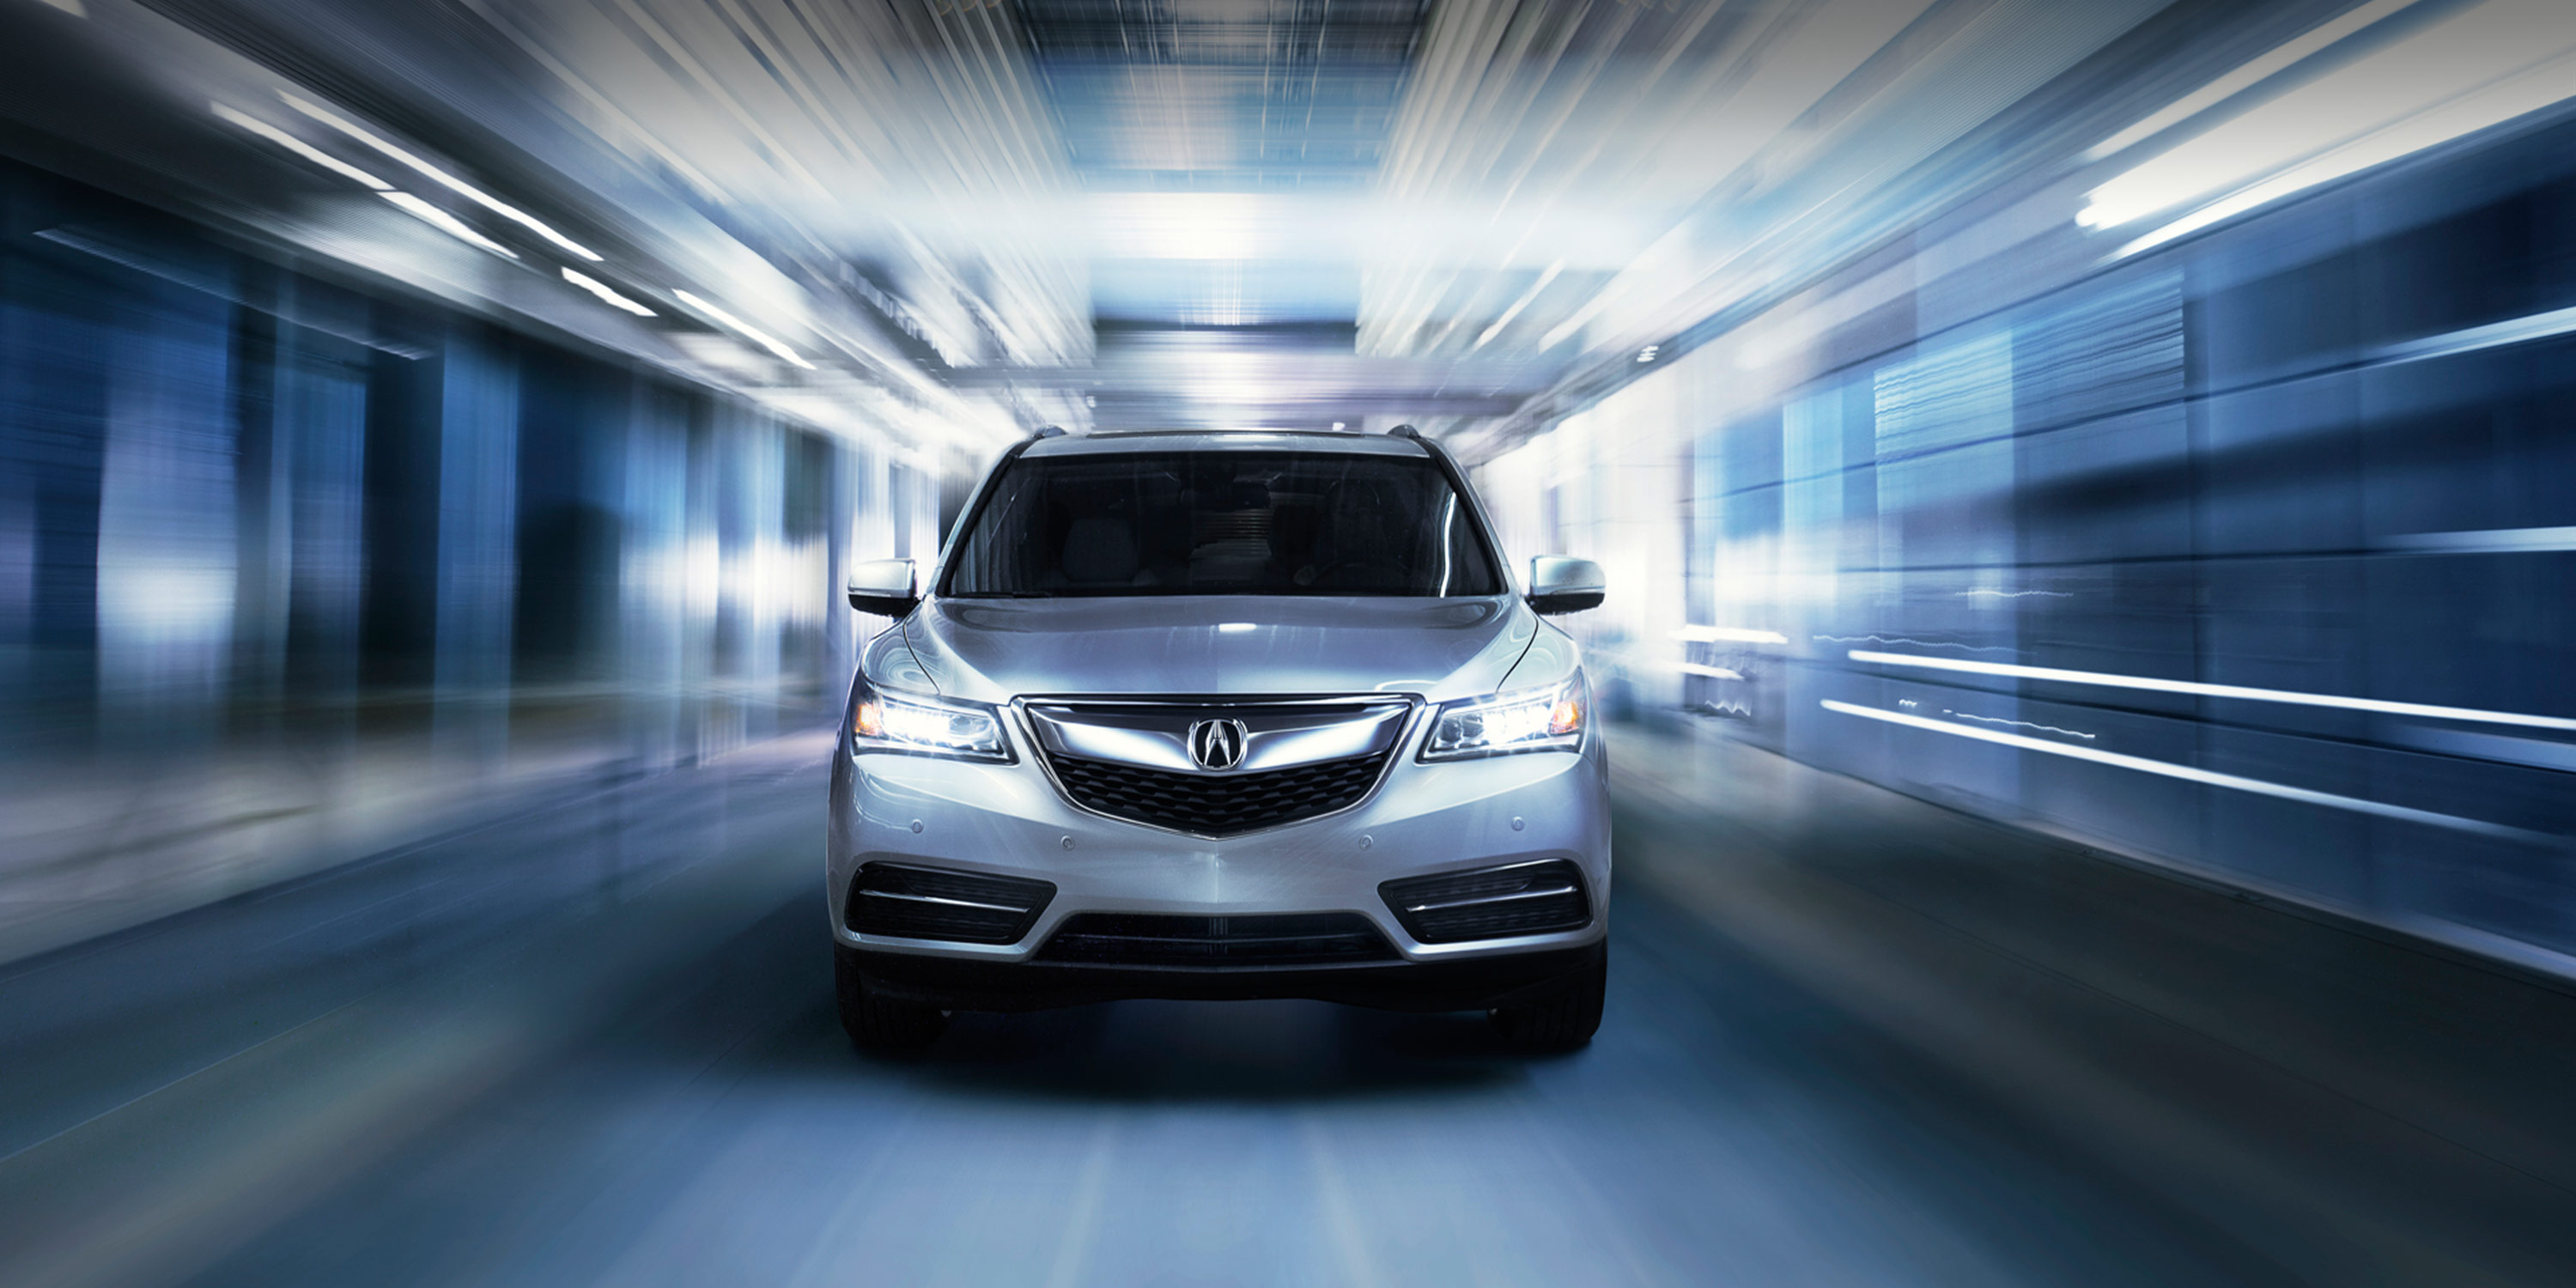 acura mdx Wallpapers hd lights